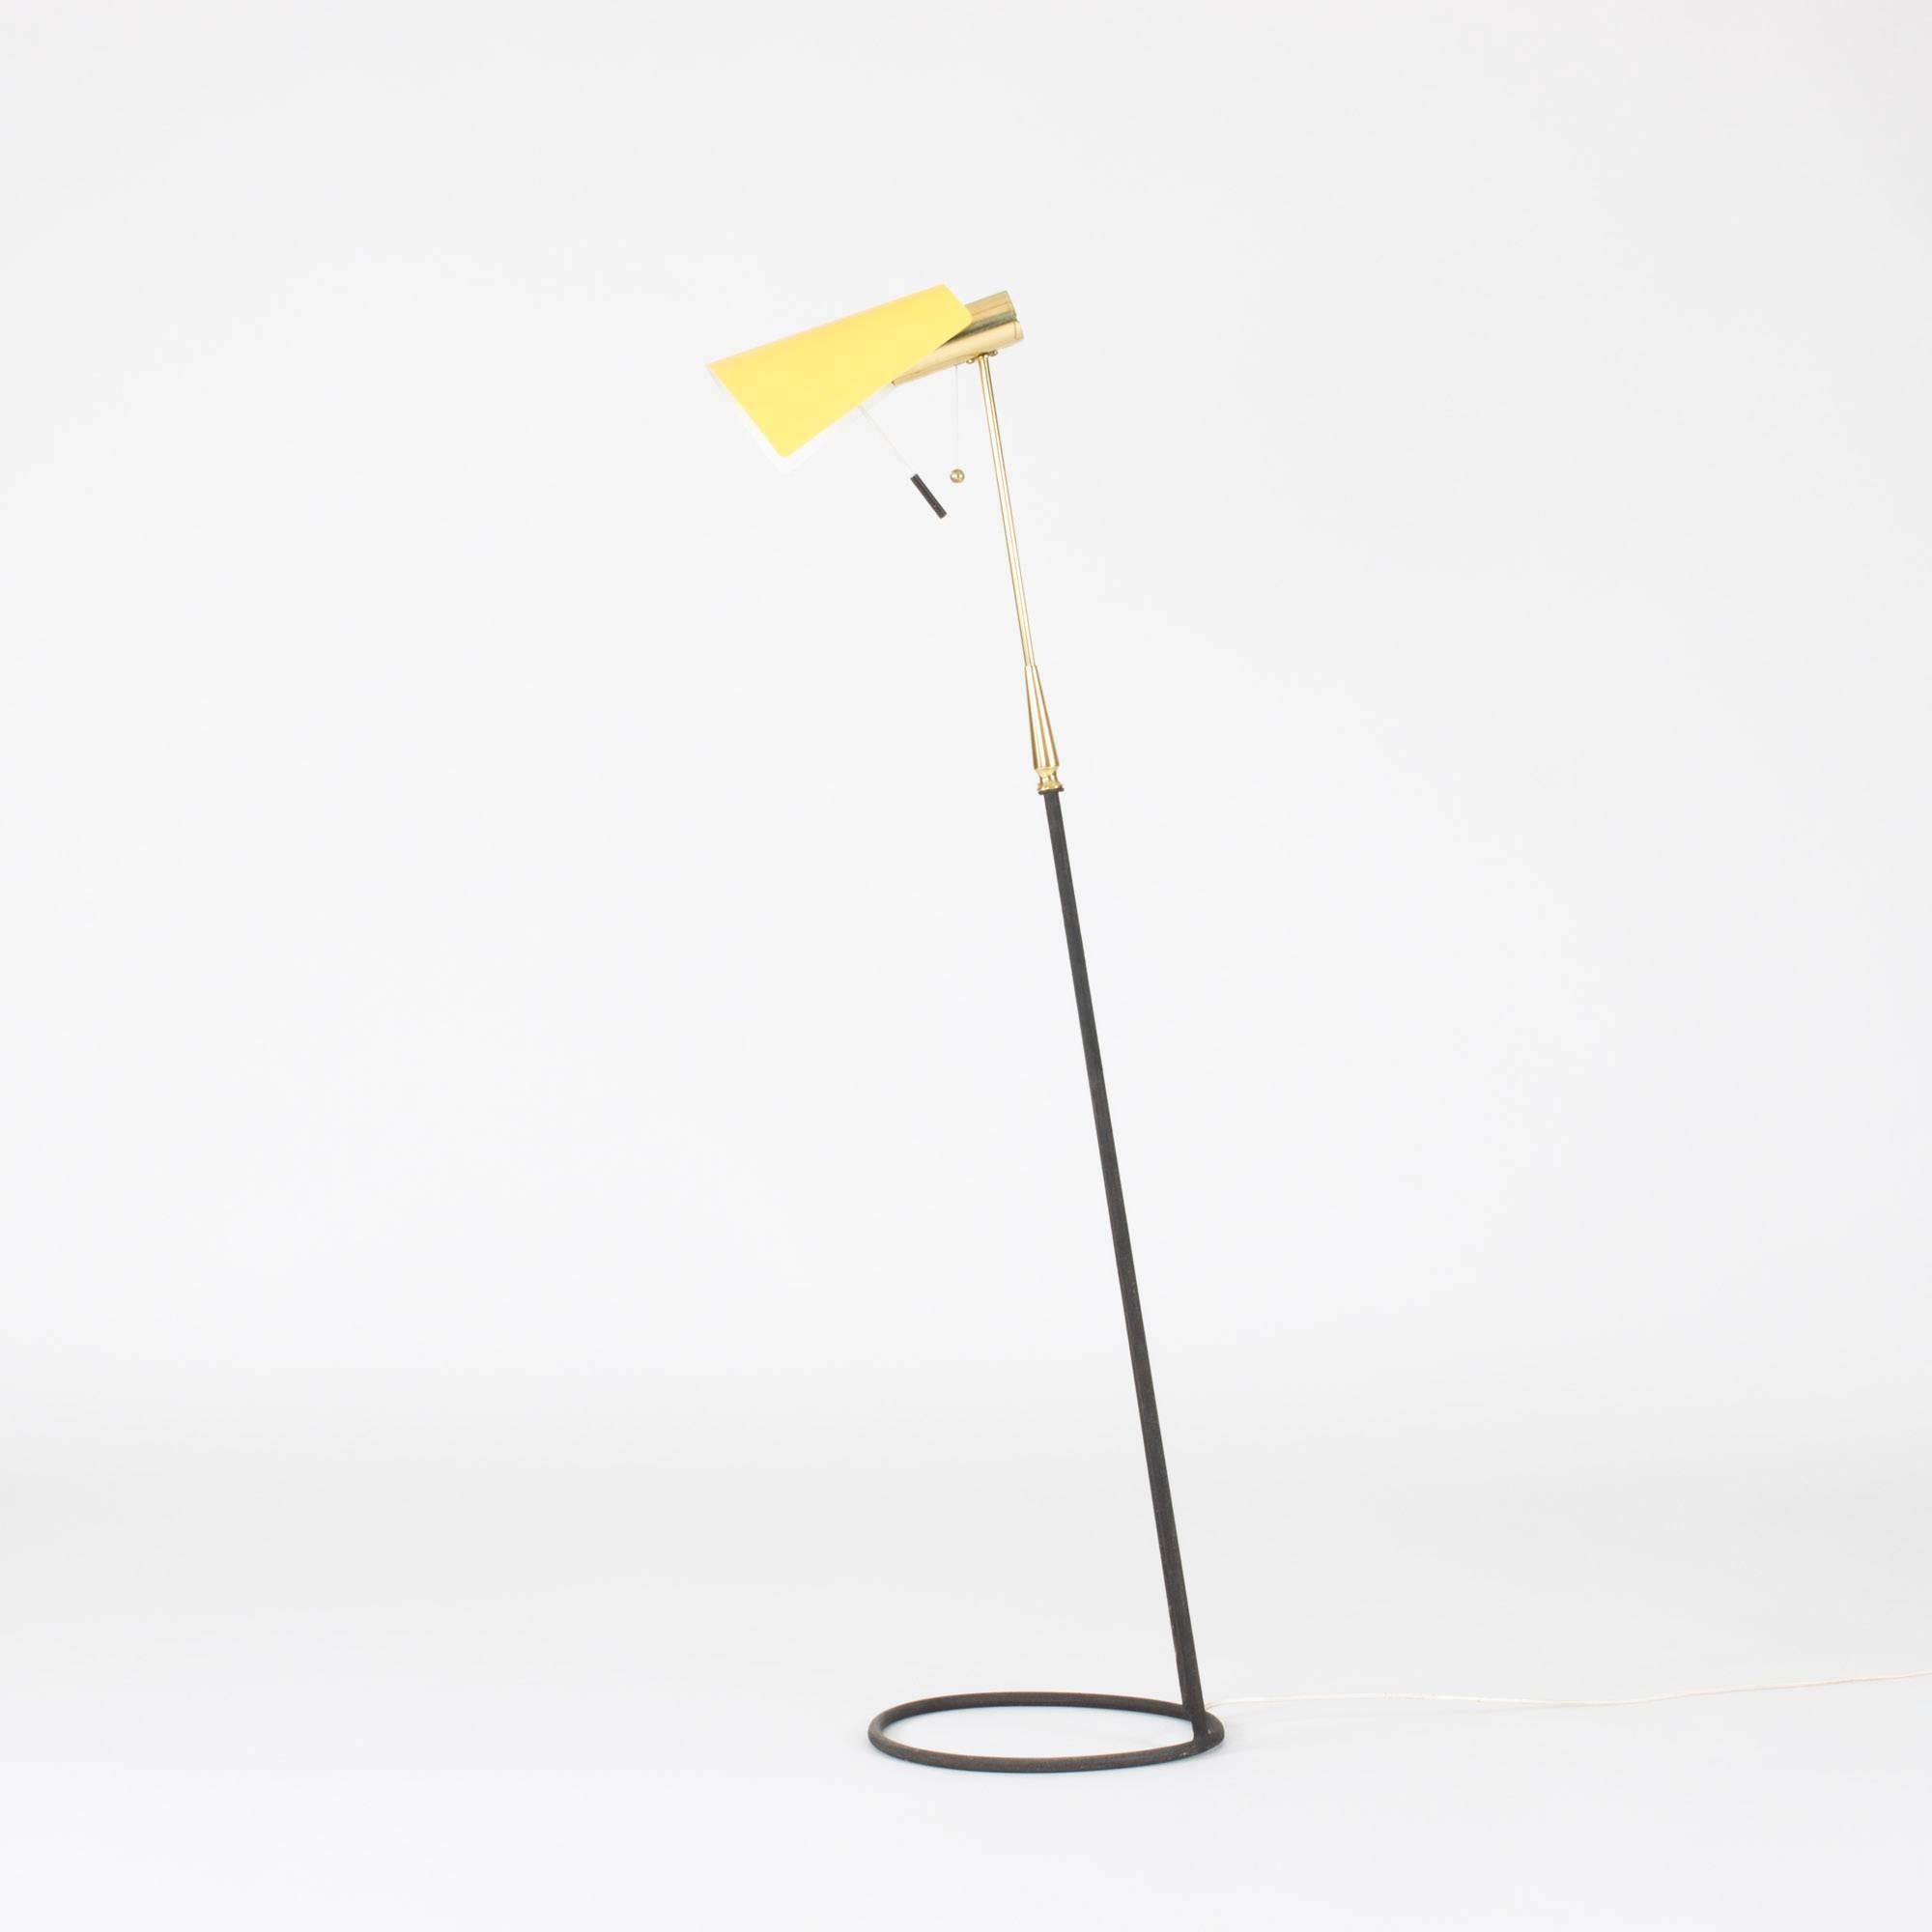 Amazing floor lamp from Falkenbergs Belysning with a brass handle and black metal base with a structured surface. Base shaped like a hoop, somewhat like a musical note, against the floor. Bright yellow metal shade with white inside, adjustable up